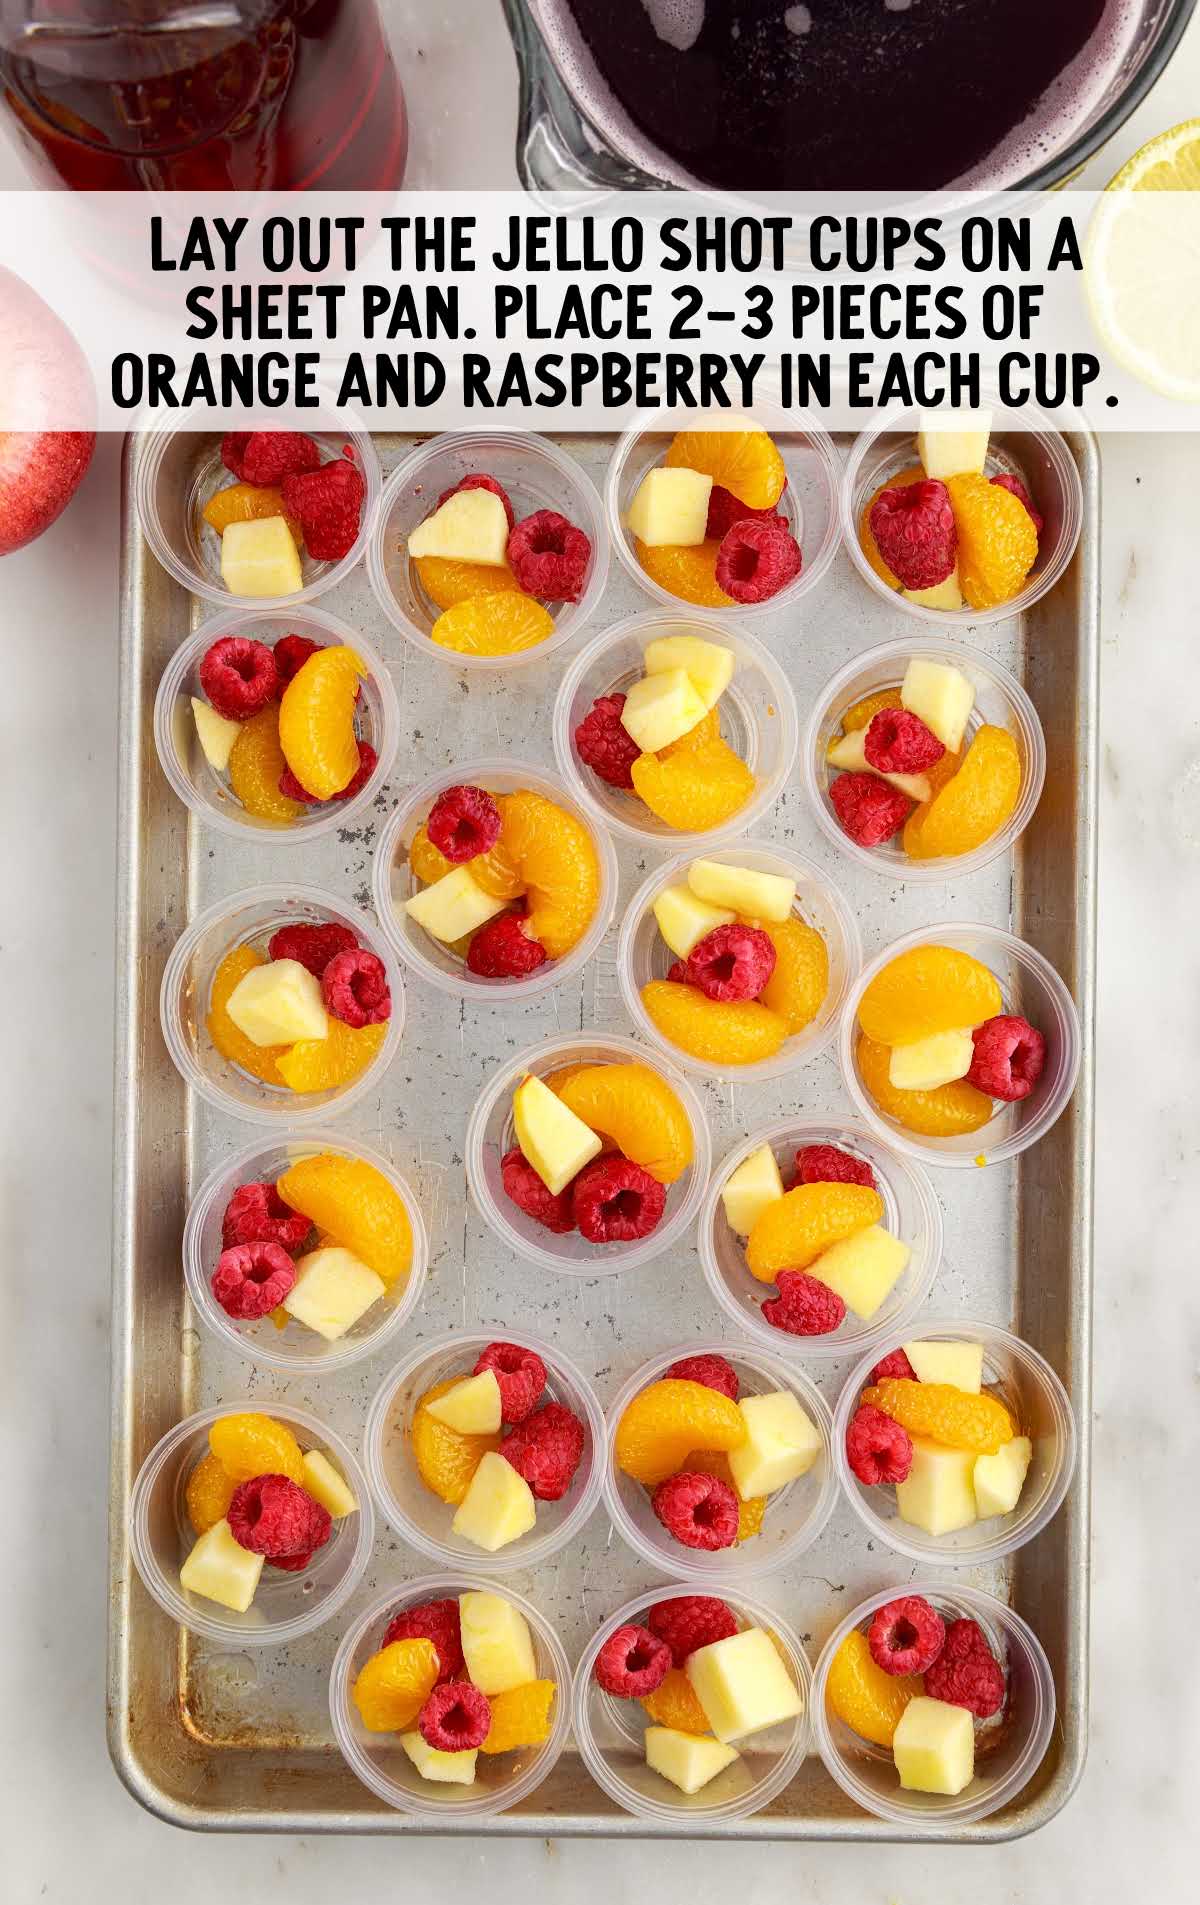 mandating oranges and raspberries placed into the jello shot cups